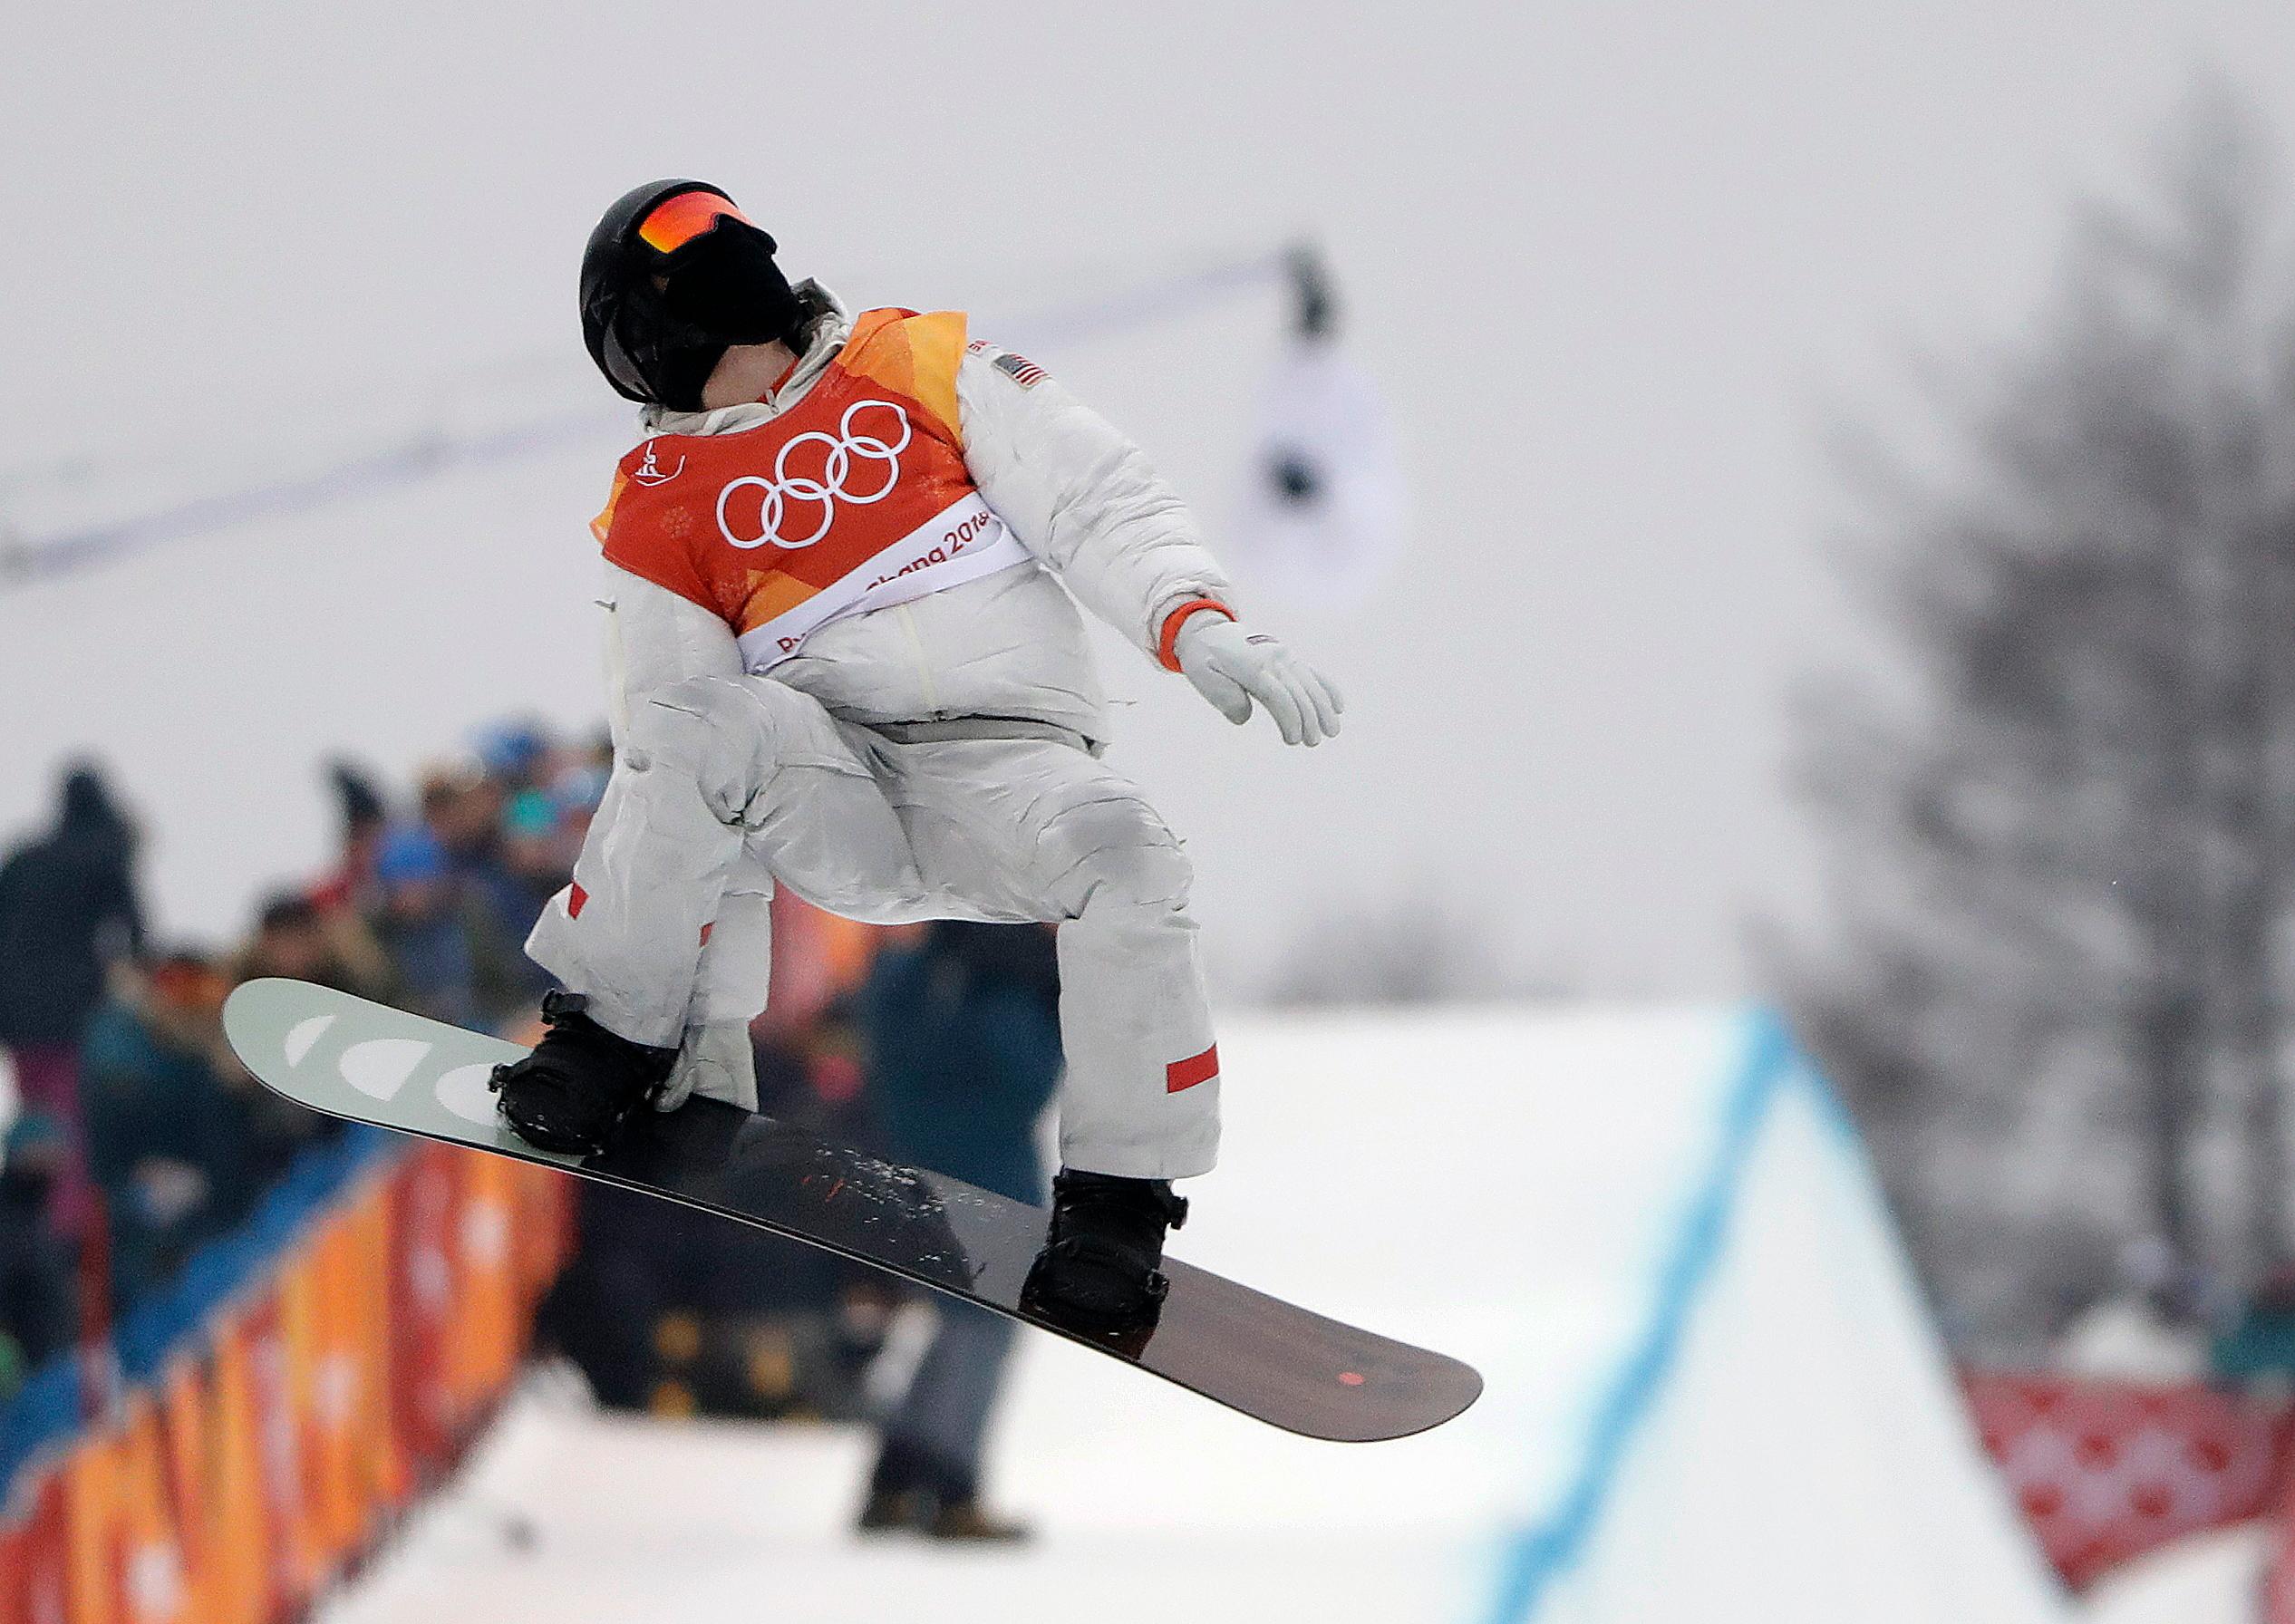 Shaun White wins 3rd Olympic gold in contest for the ages WOAI